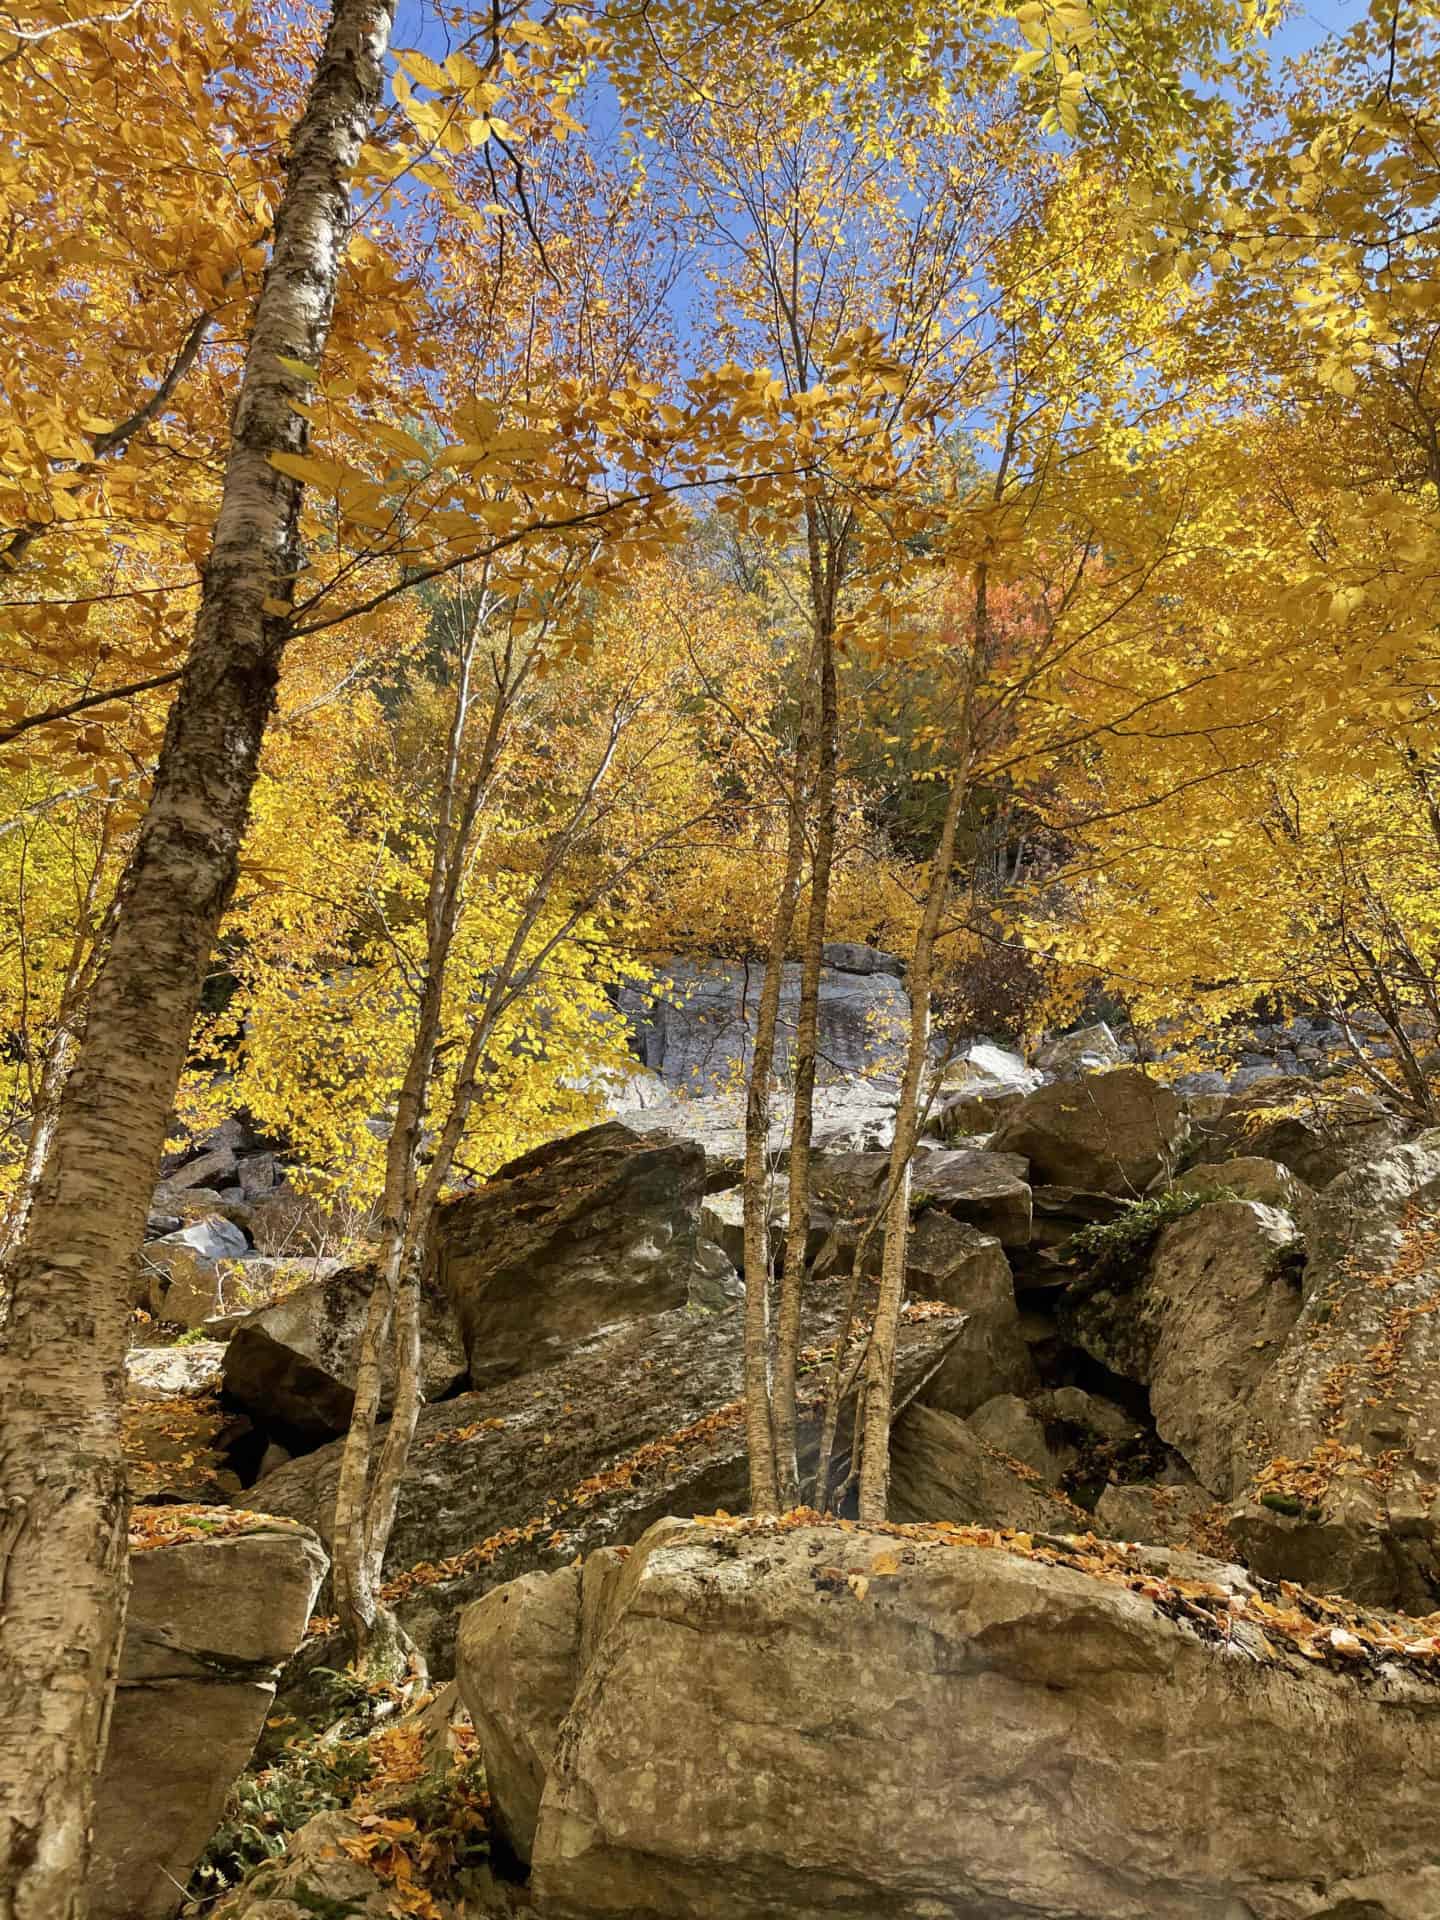 Maples turn golden against the quartzite boulders along the Chestnut Trail in Williamstown.